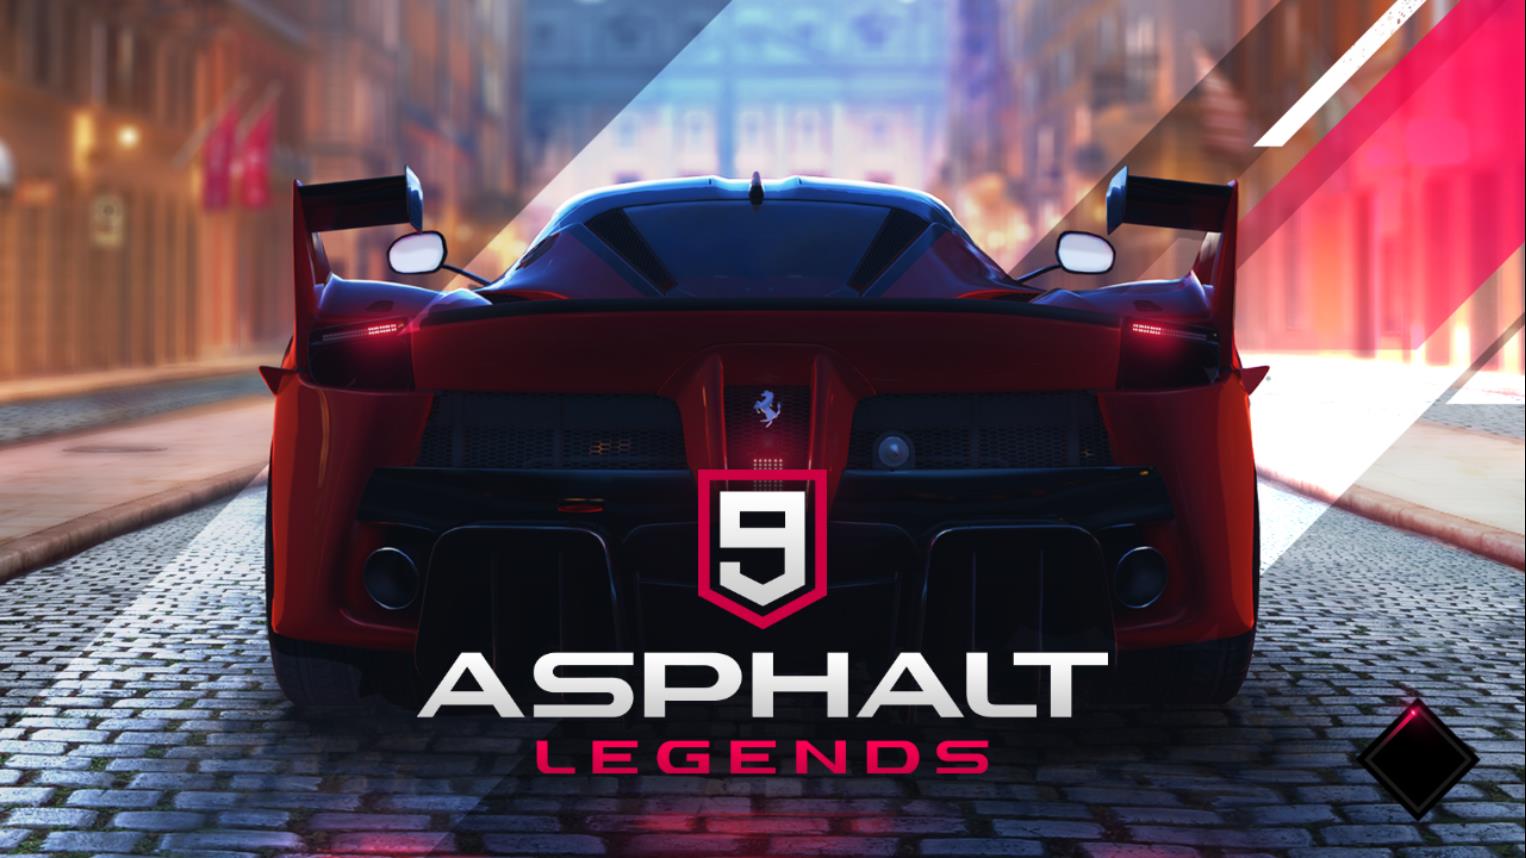 Go Into Nitro-fueled Races And Drive Your Fantasy Cars In Asphalt 9:  Legends